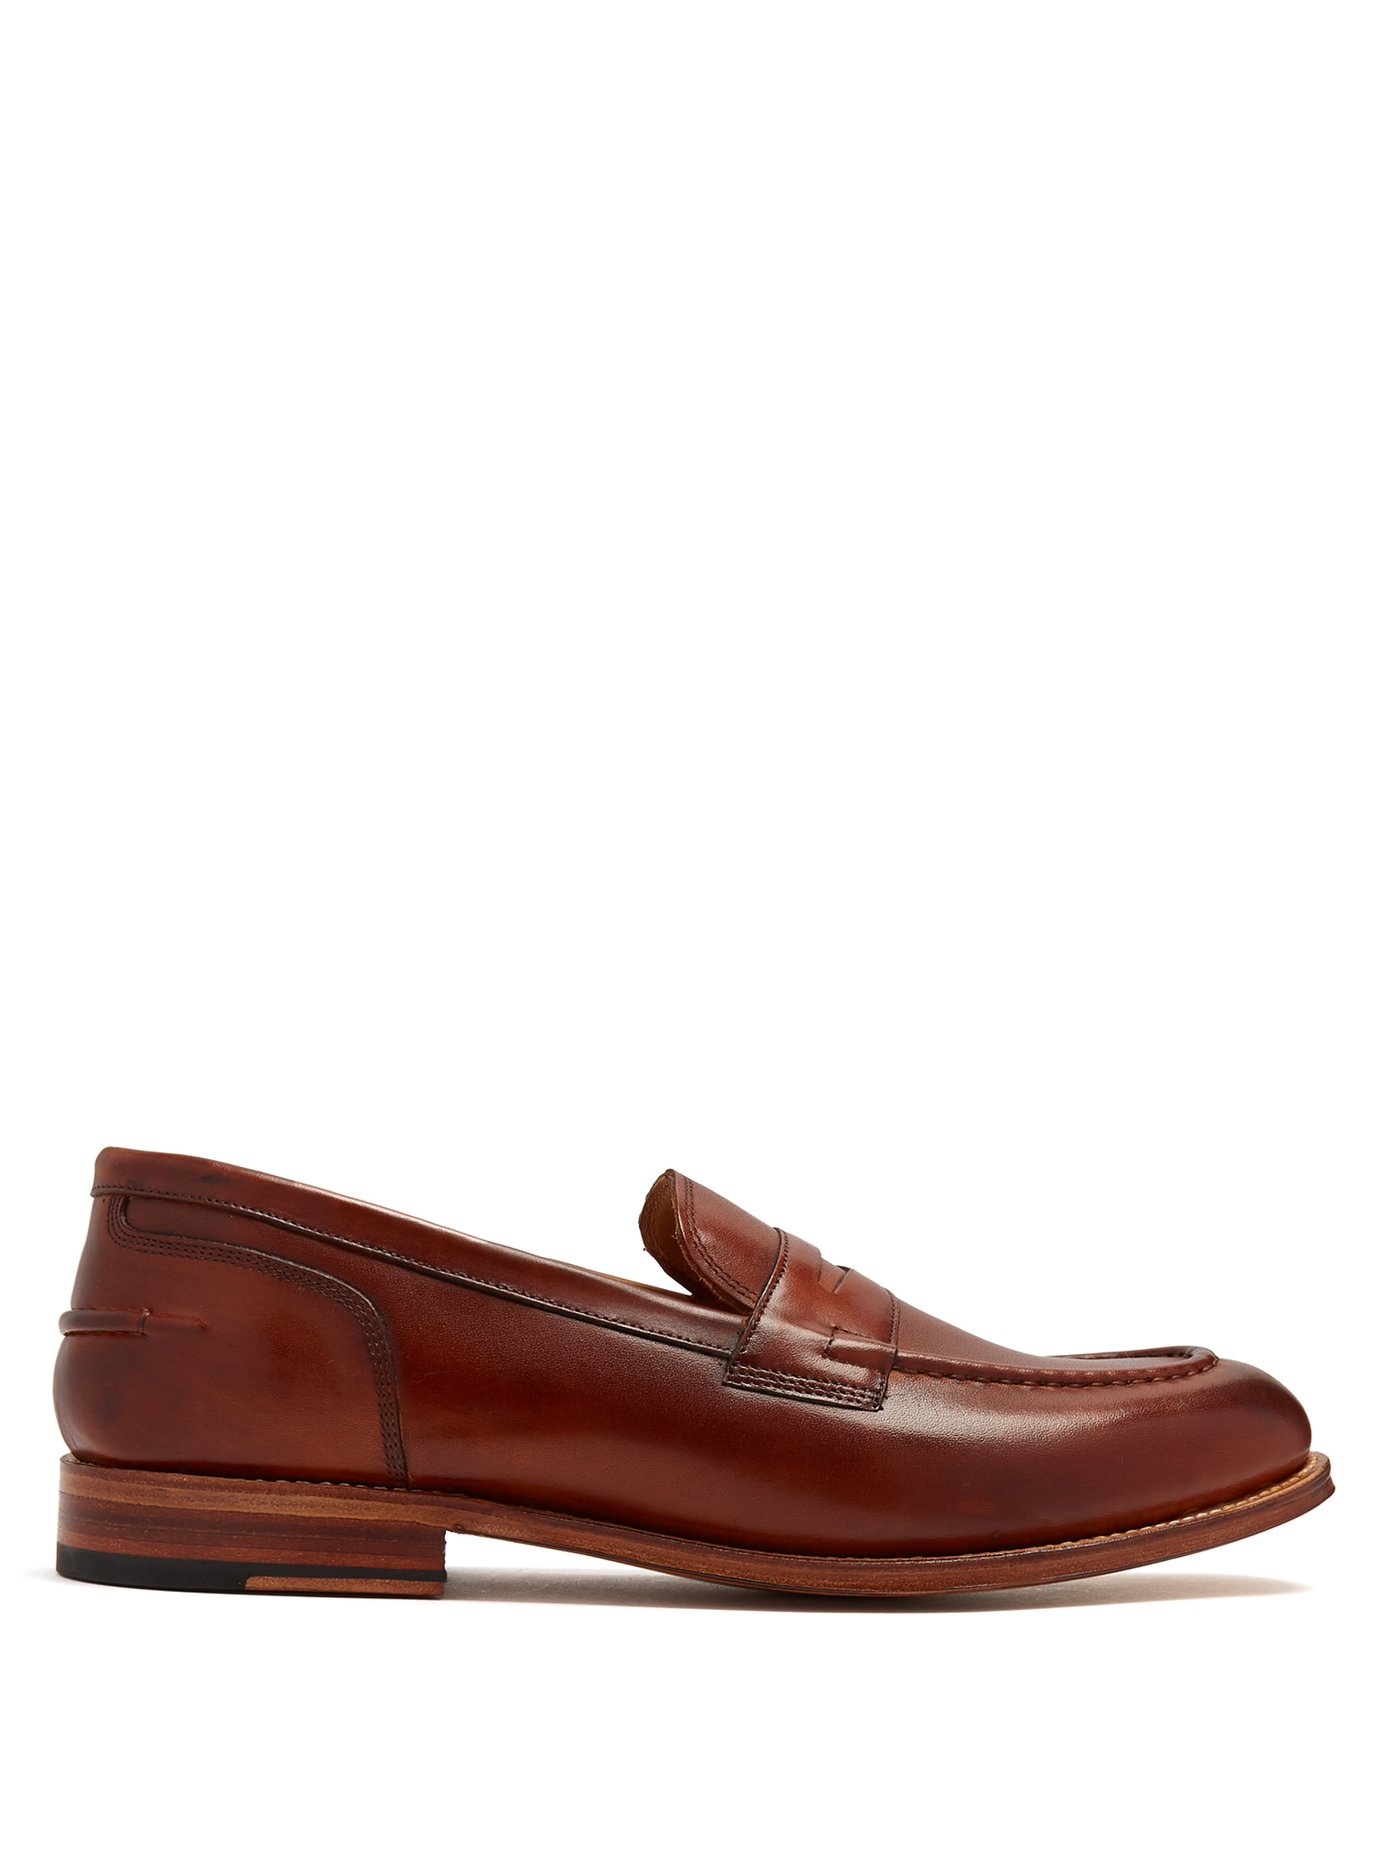 Maxwell leather penny loafers | Grenson 